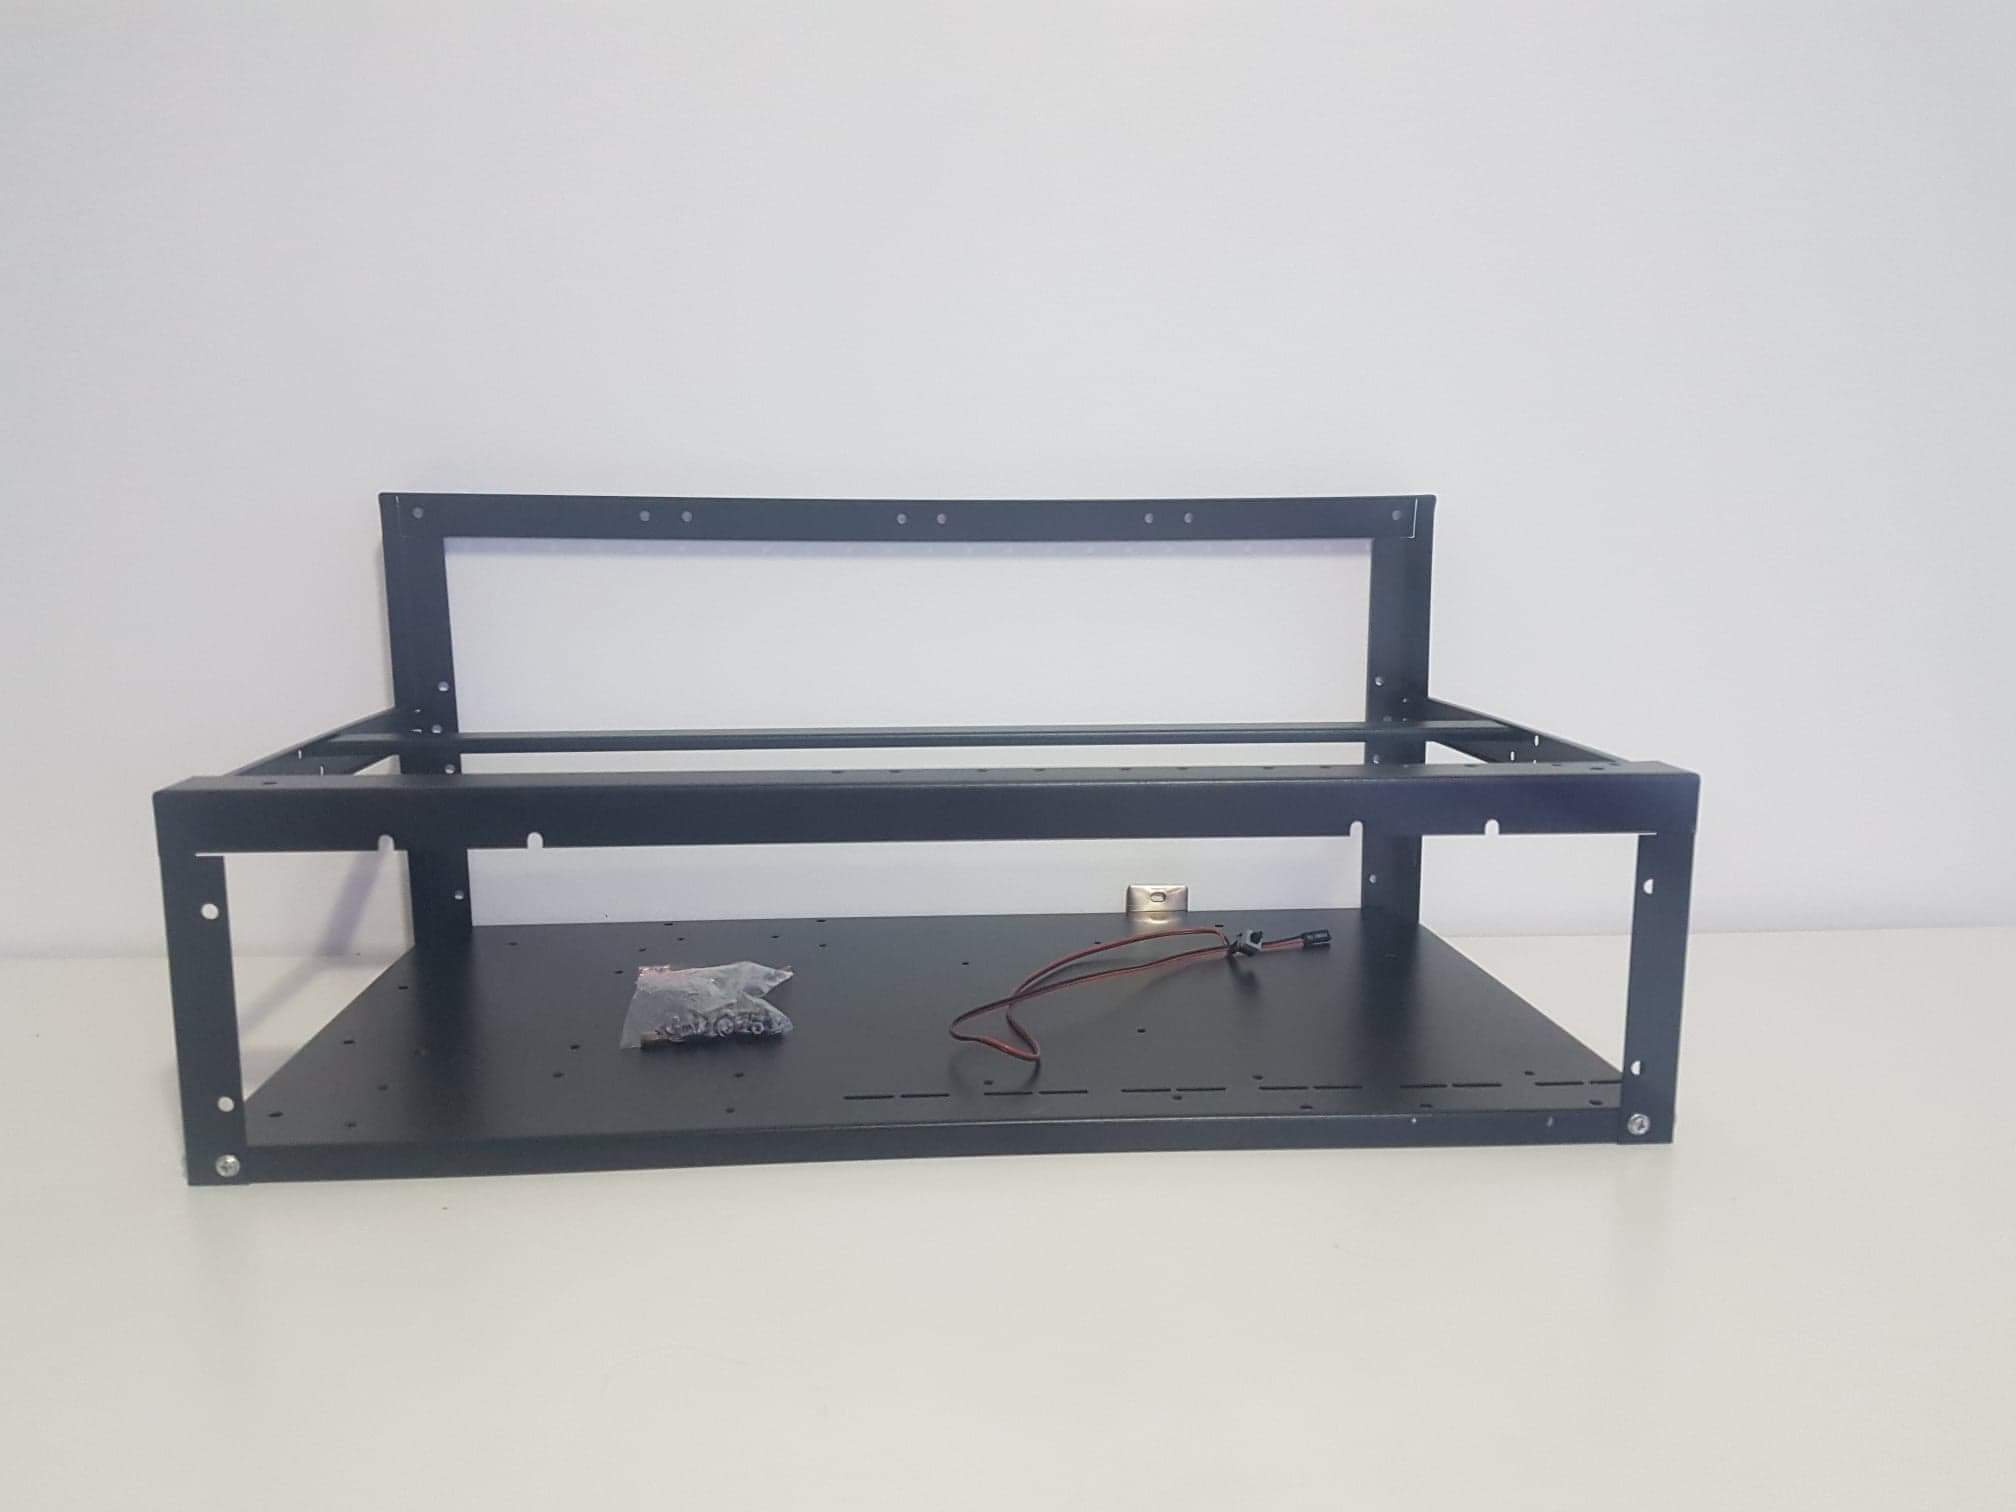 Mining Rig Frame, 6 GPU Open Air Mining Computer Frame Rig Case with Fixed Installation Screw Pack for Crypto Currency Mining Accessories - AndoVolution Australia - GPU Risers - crypto mining - Located: North Lakes, Brisbane, QLD, Australia